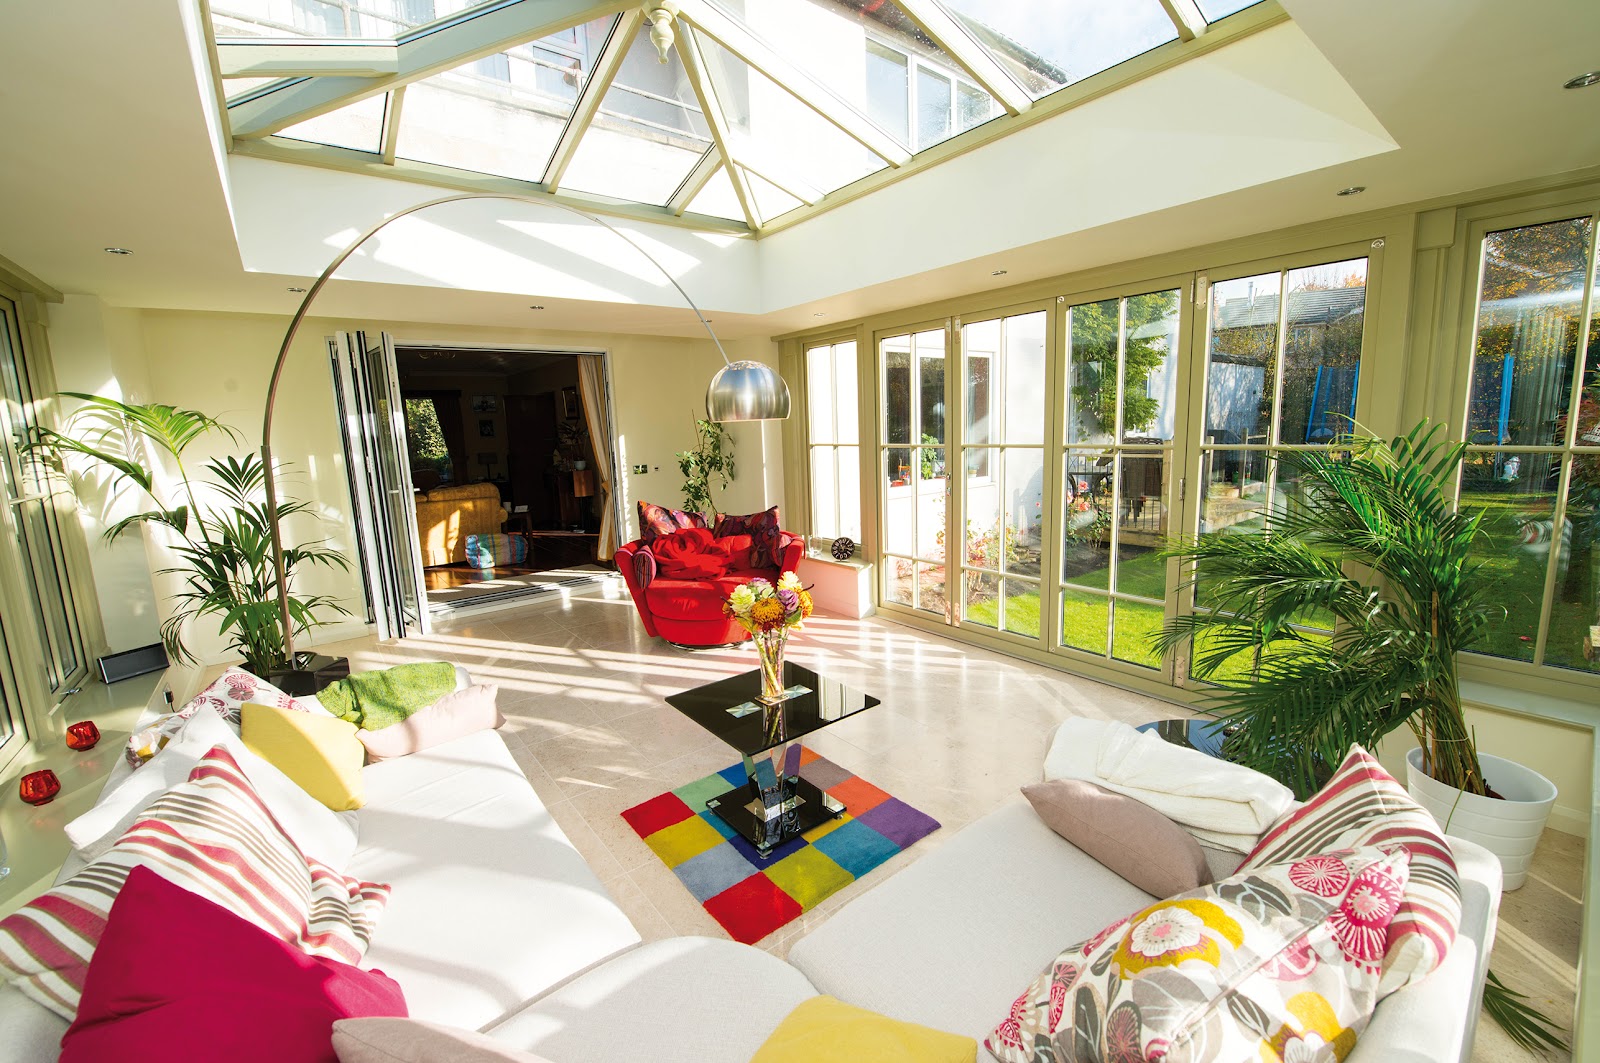 Light-filled conservatory space